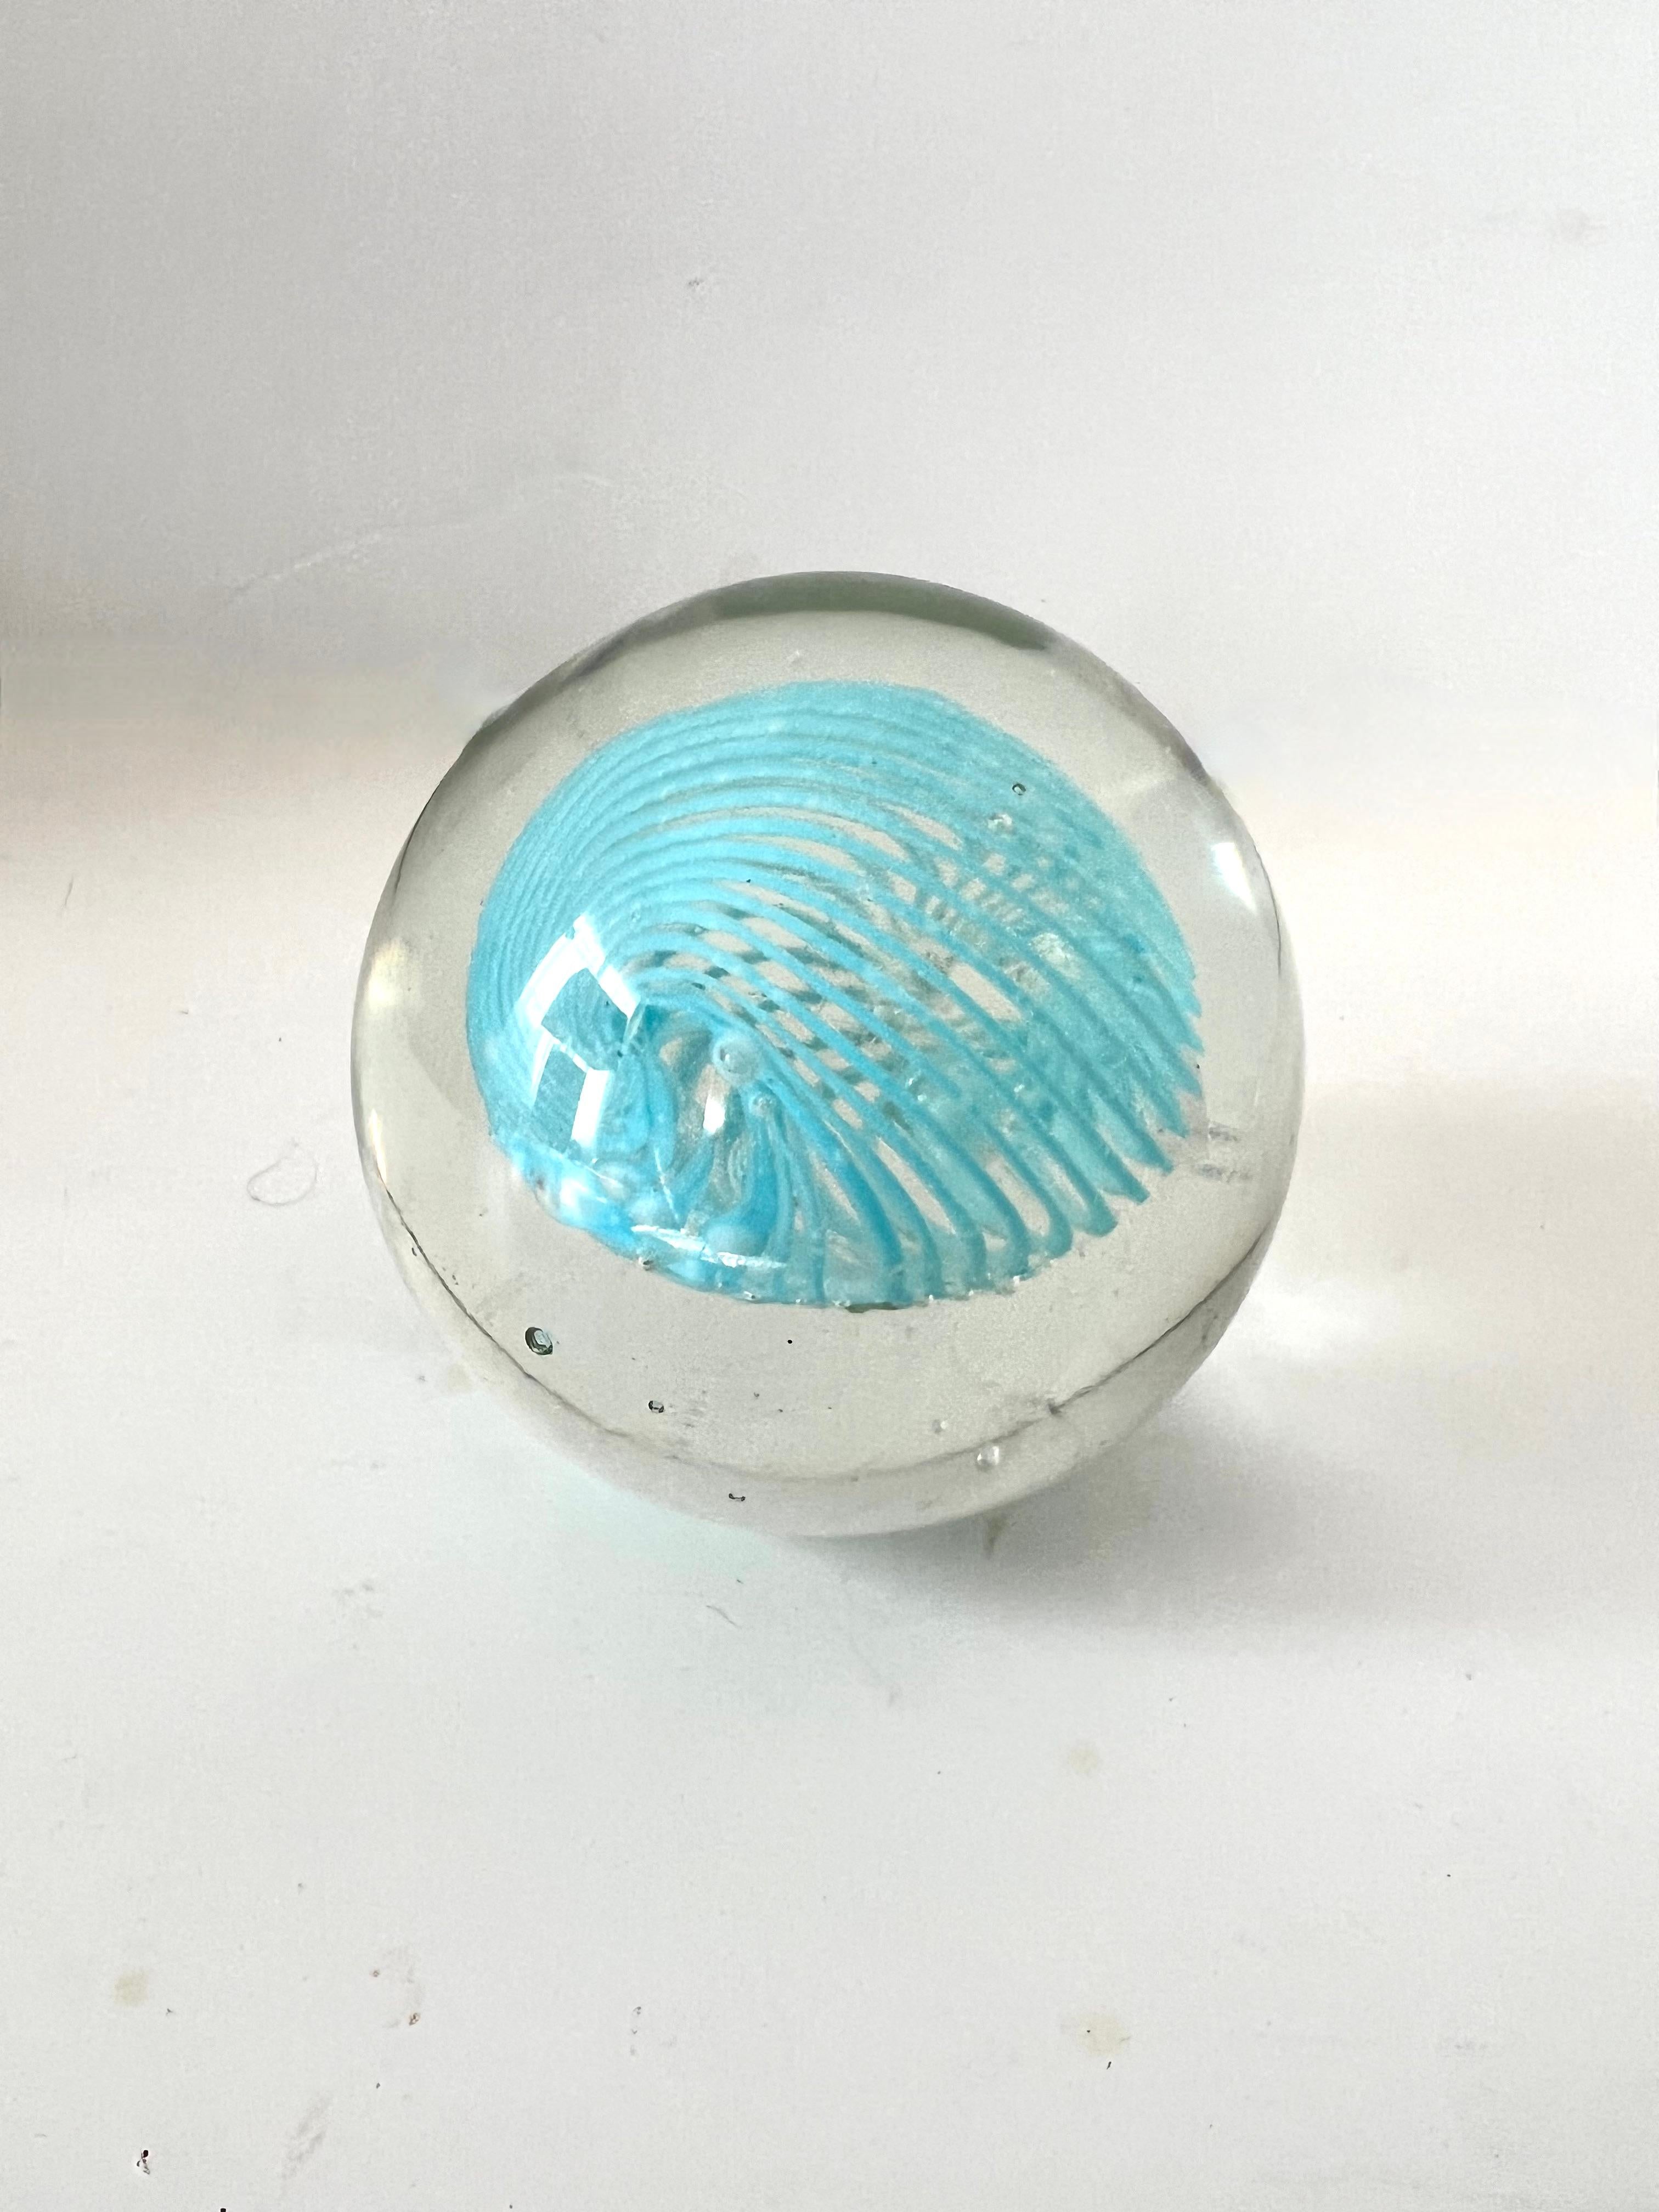  A beautiful clear glass paper weight with a Tiffany Blue Swirl of glass - the perfect size and could be a paperweight for smaller books.